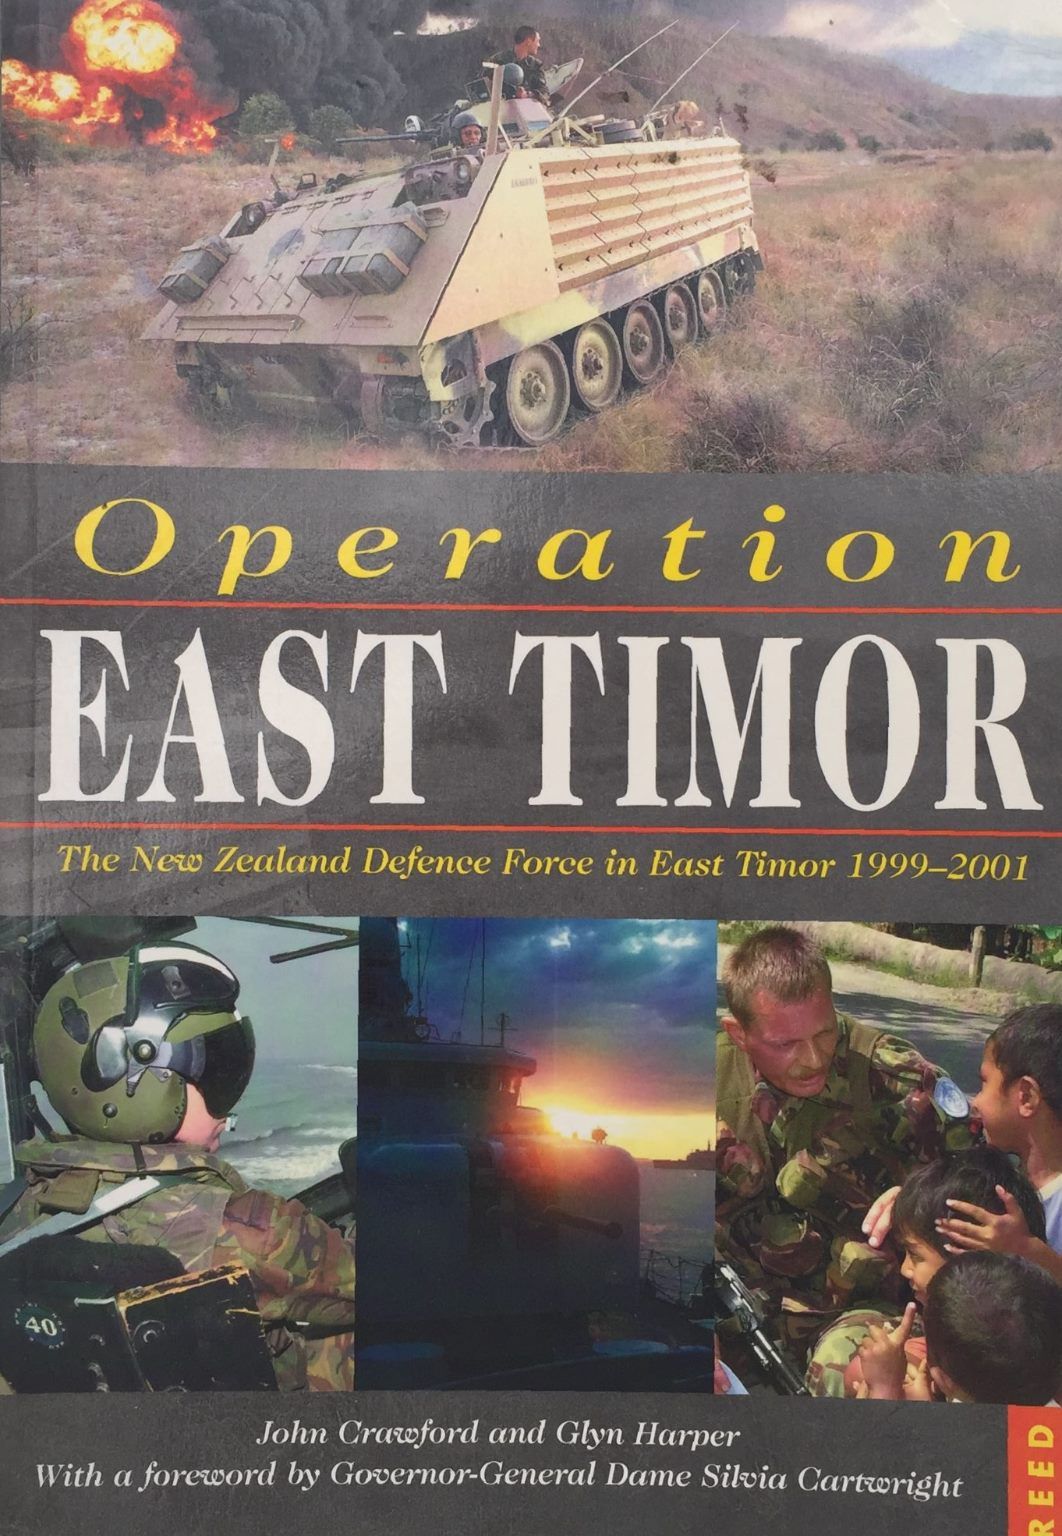 OPERATION EAST TIMOR: NZ Defence Force in East Timor 1999-2001